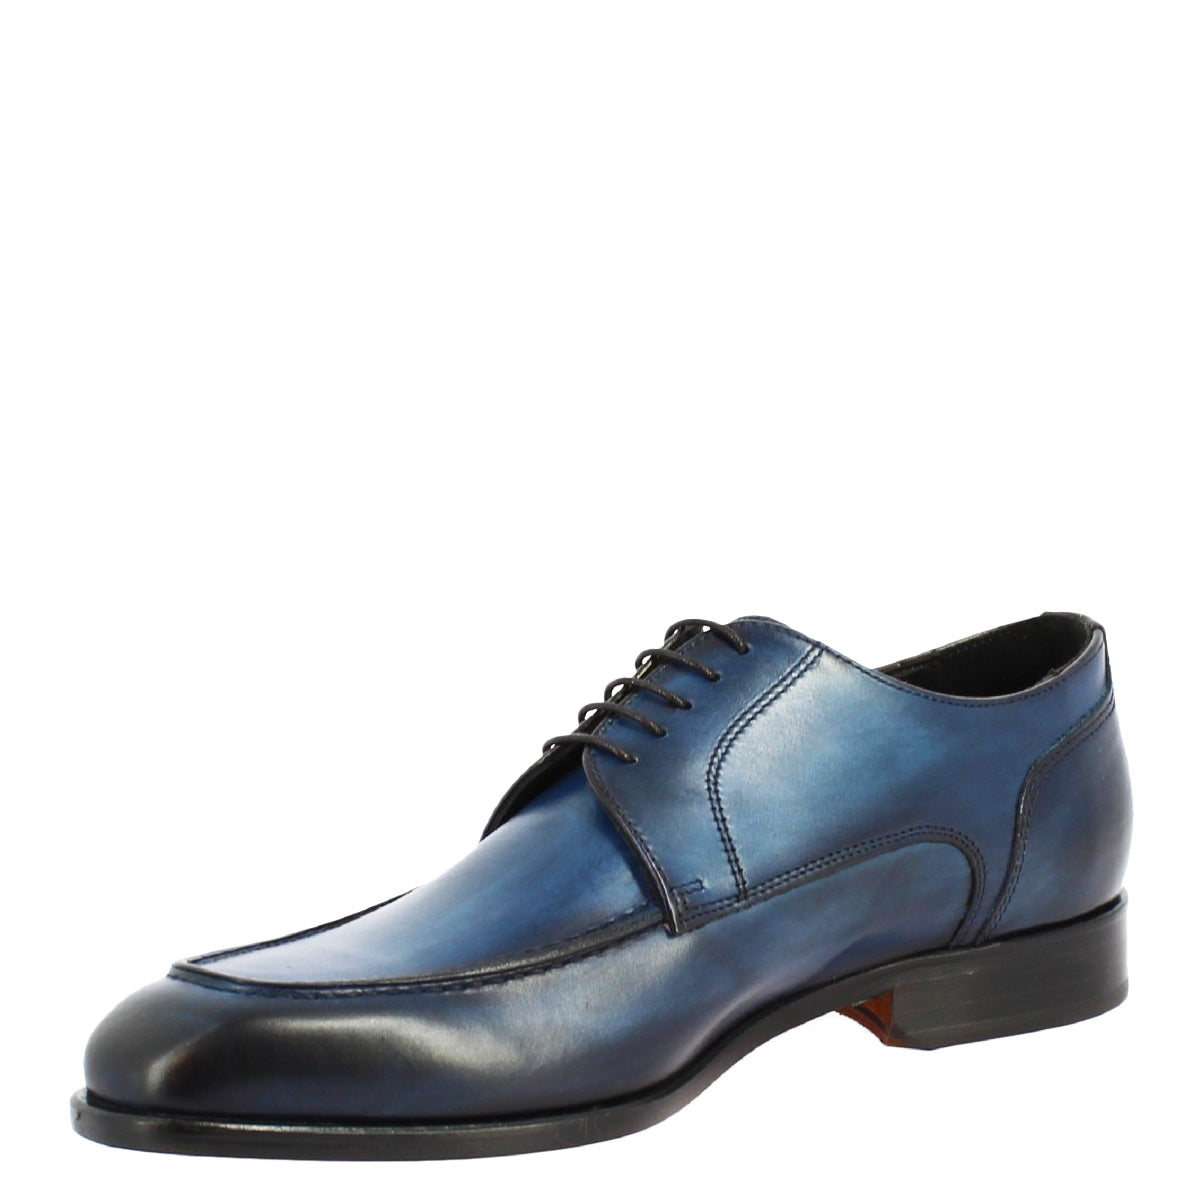 Men's handmade lace-up shoes in blue calf leather